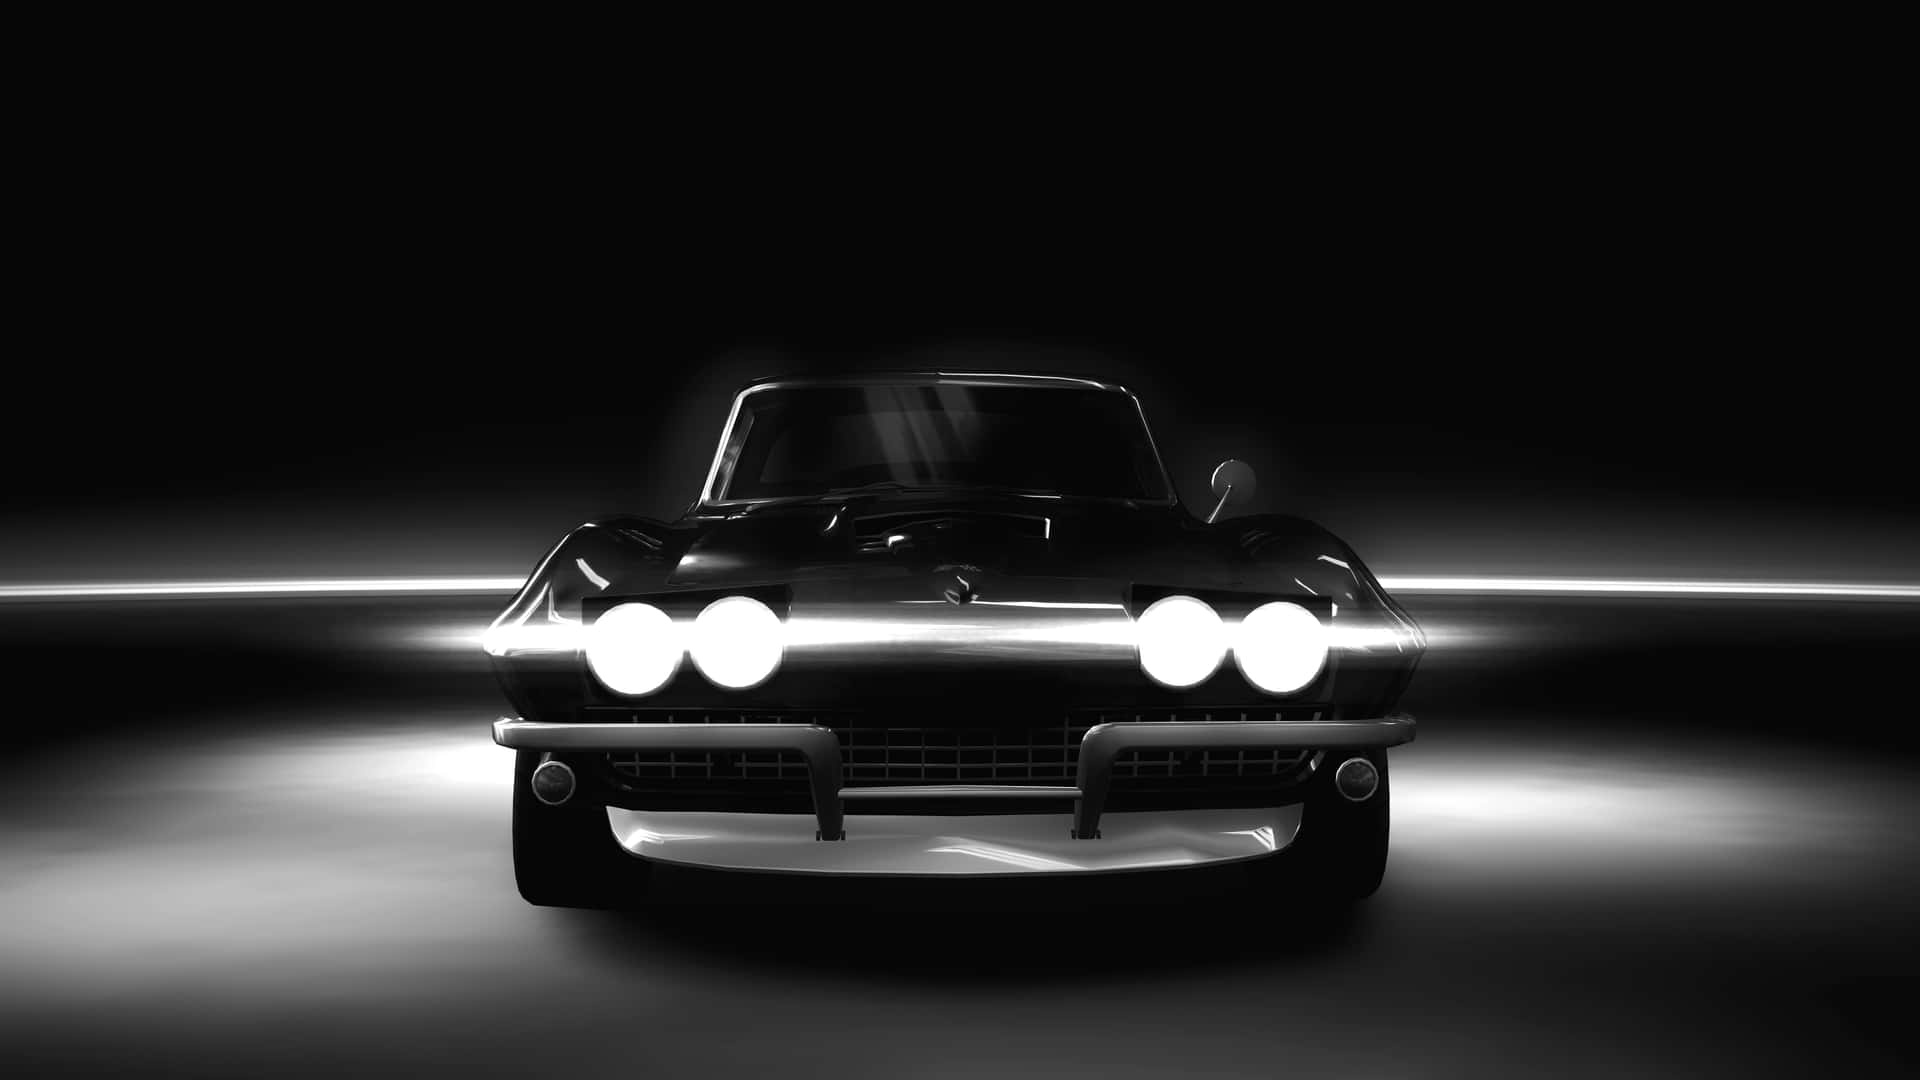 Mysterious Classic Carin Darkness Wallpaper